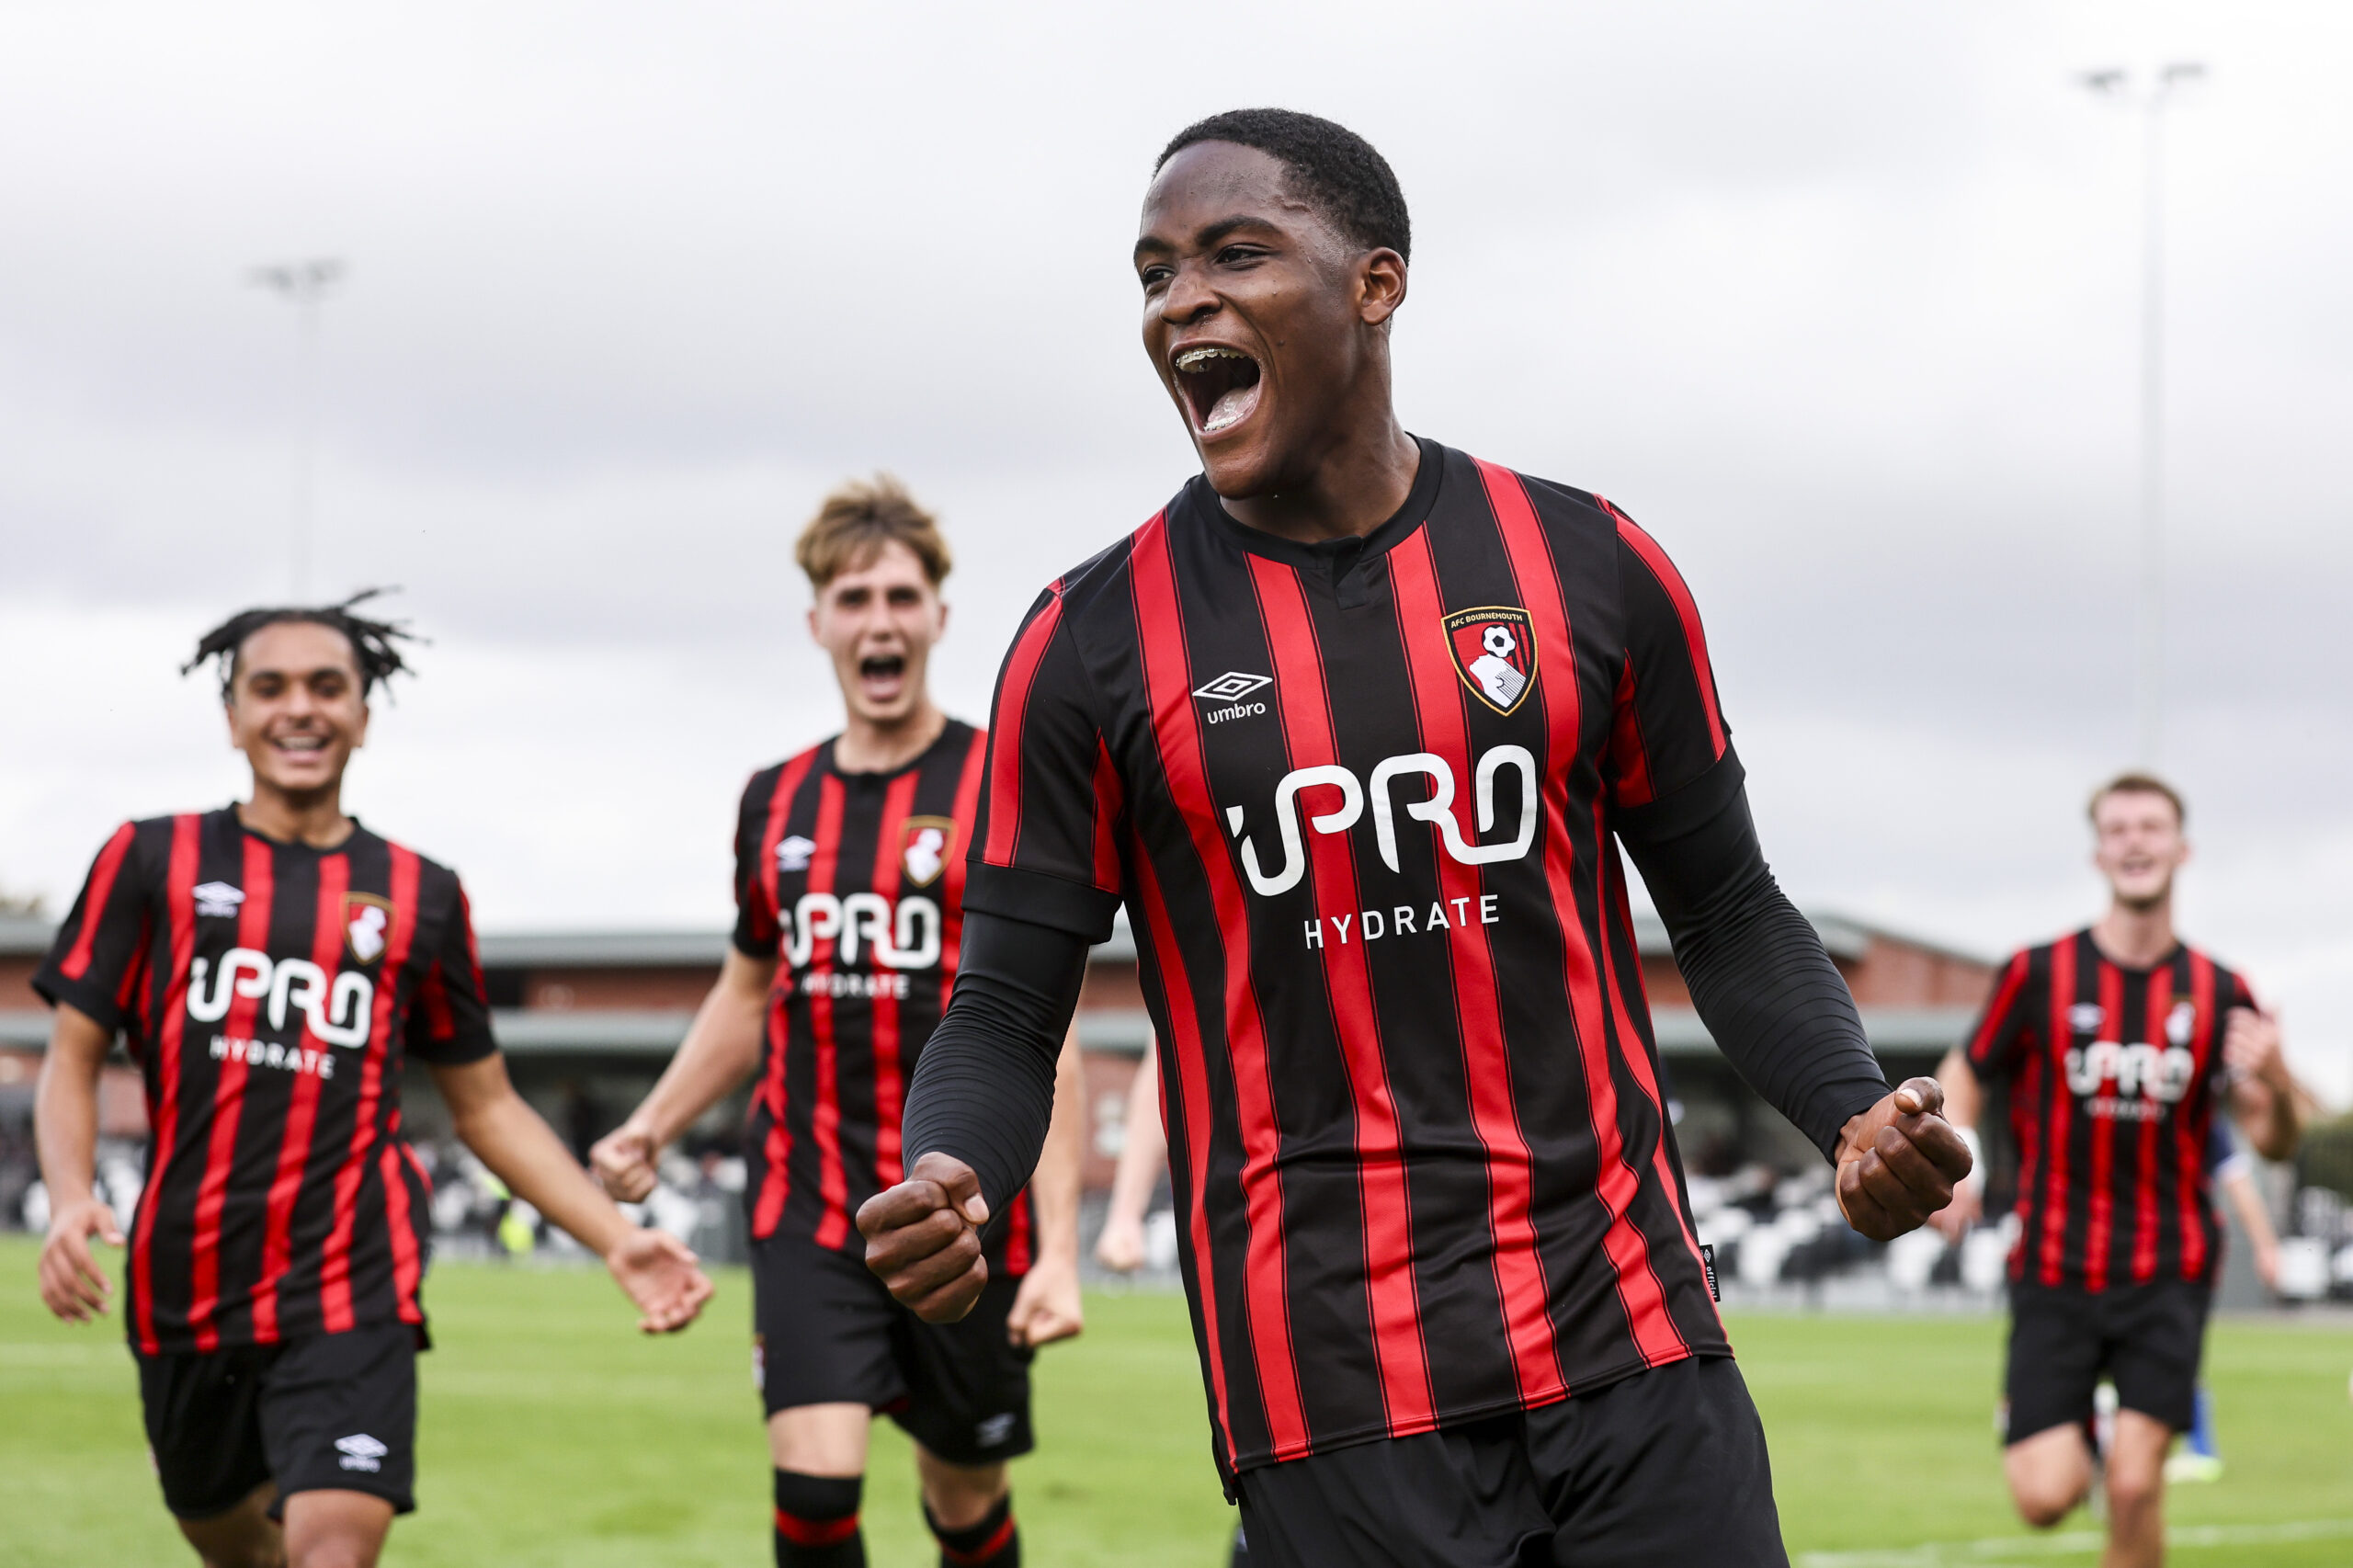 Ghanaian youngster Daniel Adu-Adjei scores winning goal for AFC Bournemouth U-20 against Charlton Athletic